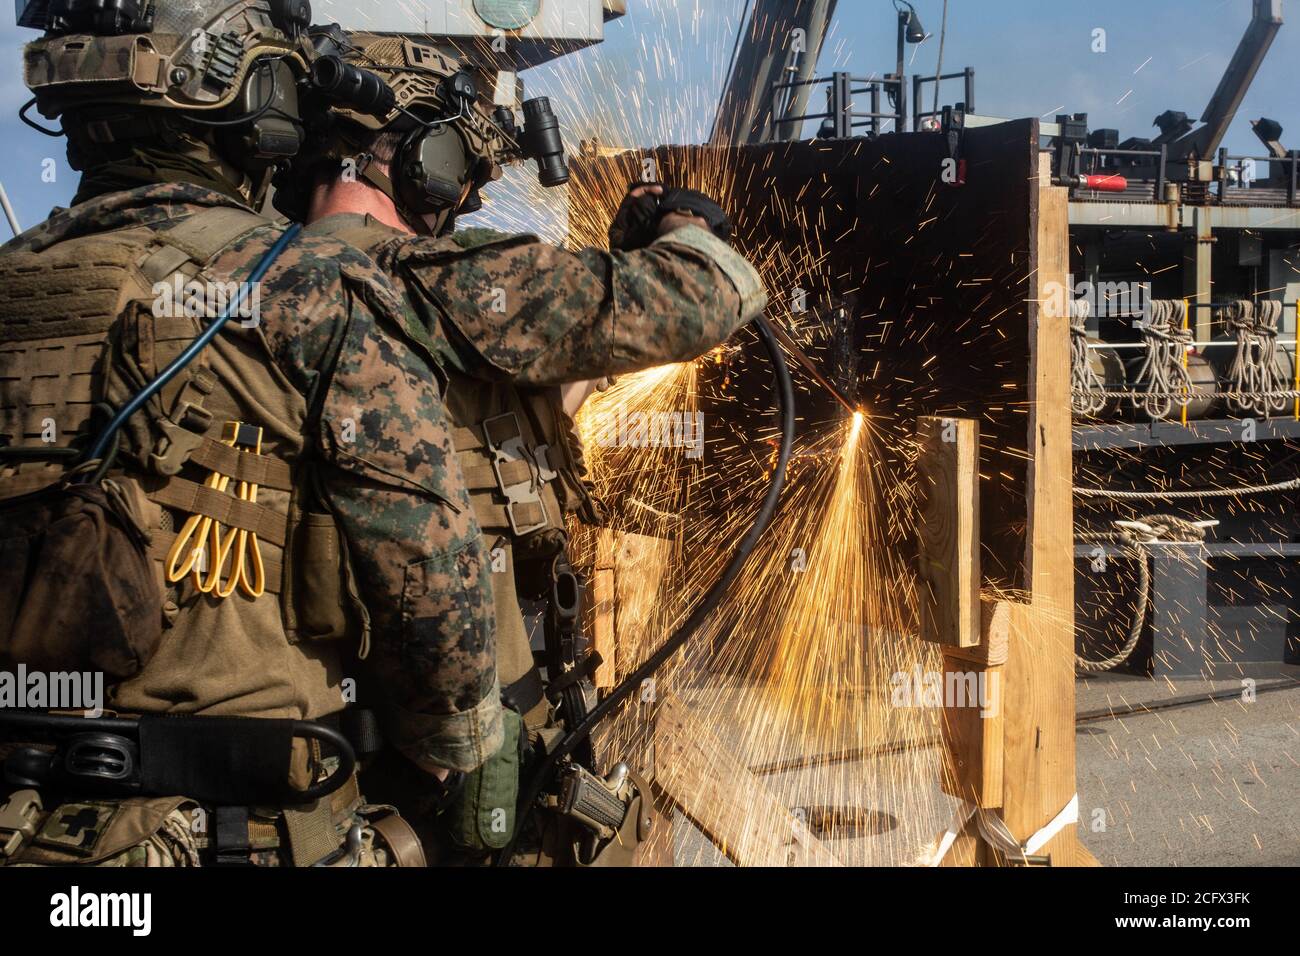 SOUTH CHINA SEA (Sep. 5, 2020) Force Reconnaissance Marines with Command Element, 31st Marine Expeditionary Unit (MEU), cut through metal during a simulated Visit, Board, Search and Seizure (VBSS) mission drills aboard dock landing ship USS Germantown (LSD 42). VBSS is a part of Maritime Interception Operations that aim to delay, disrupt, or destroy enemy forces or supplies in the maritime domain. Germantown, part of the America Amphibious Readiness Group (ARG), 31st MEU team, is operating in the U.S. 7th Fleet area of operations to enhance interoperability with allies and partners and serve a Stock Photo